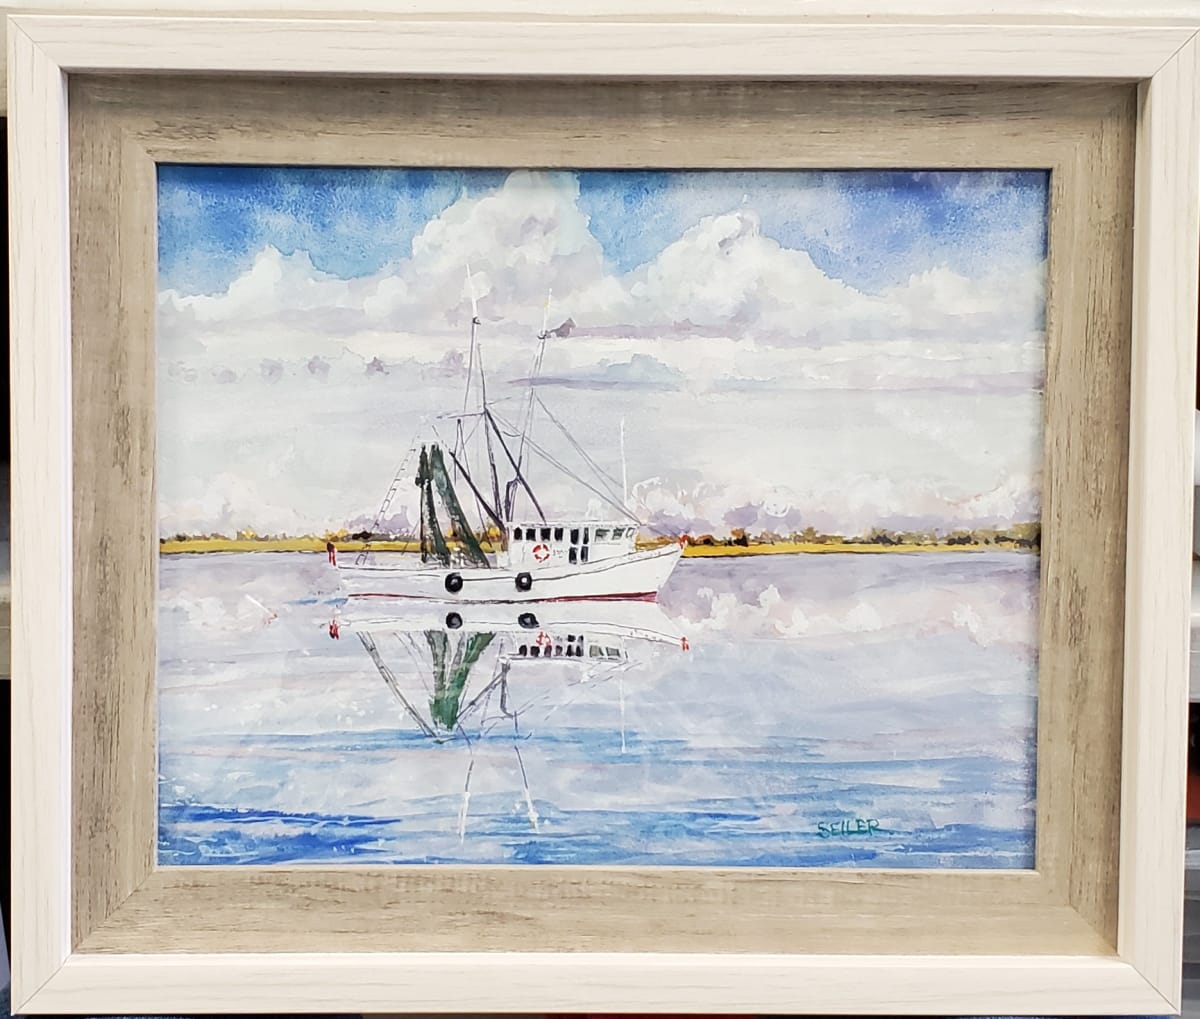 Shrimp From The Dock by Jill Seiler  Image: Gouache is opaque watercolor.  Shrimp boats are always busy on this Bay. 